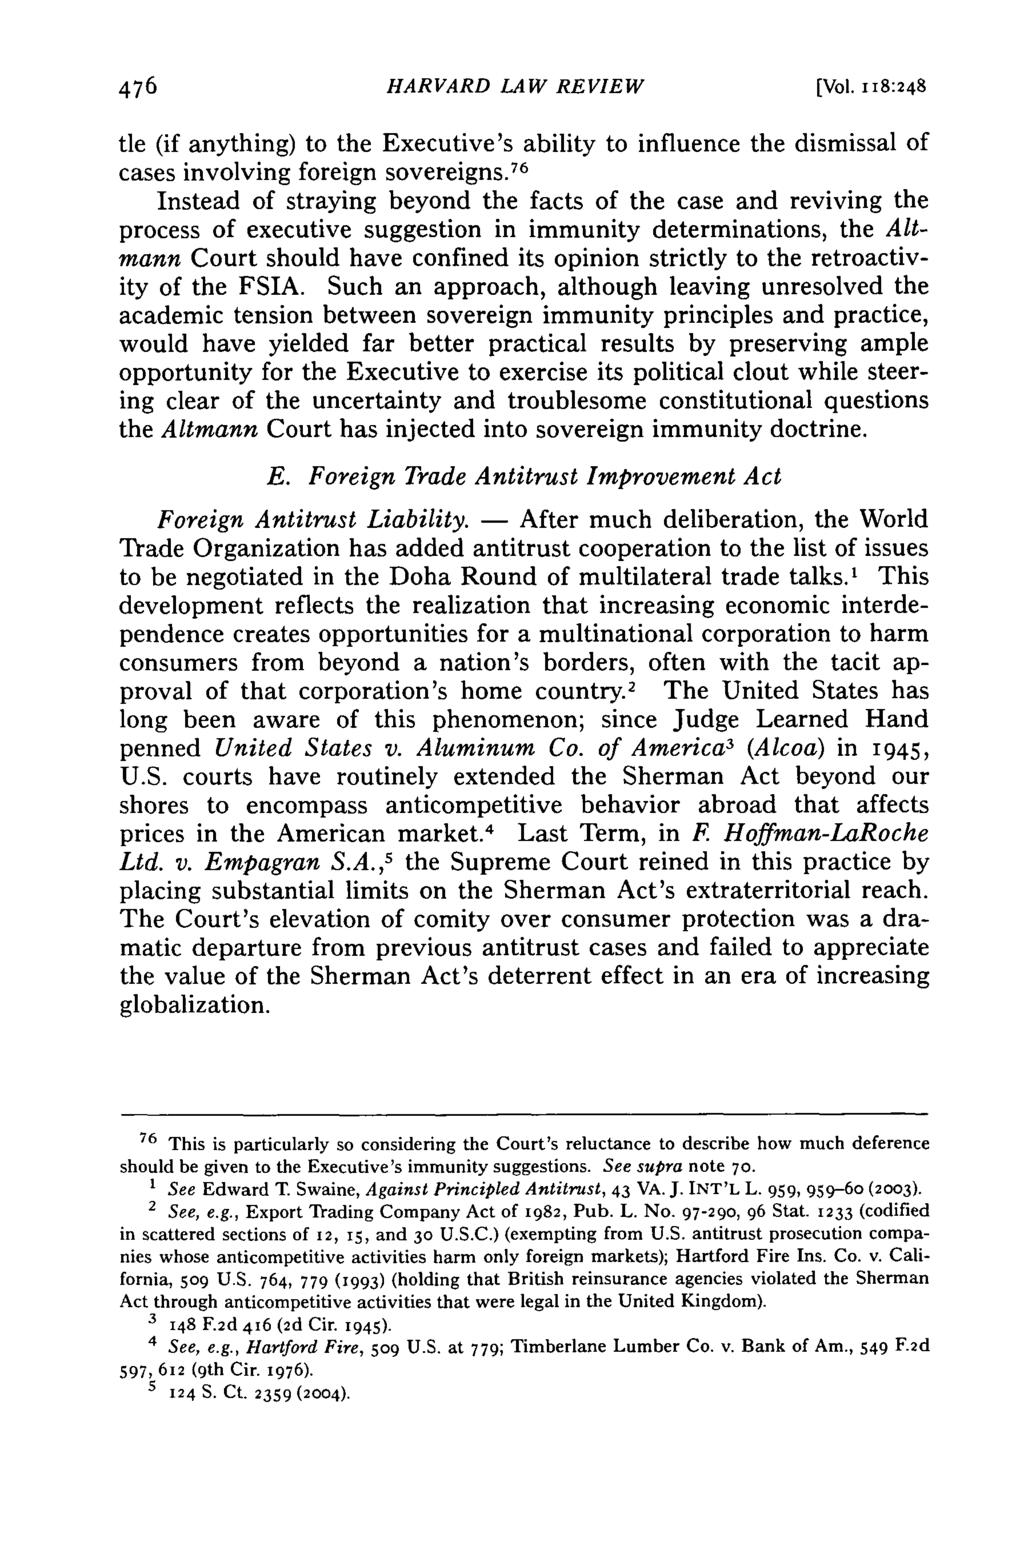 HARVARD LAW REVIEW [Vol. 118:248 tie (if anything) to the Executive's ability to influence the dismissal of cases involving foreign sovereigns.